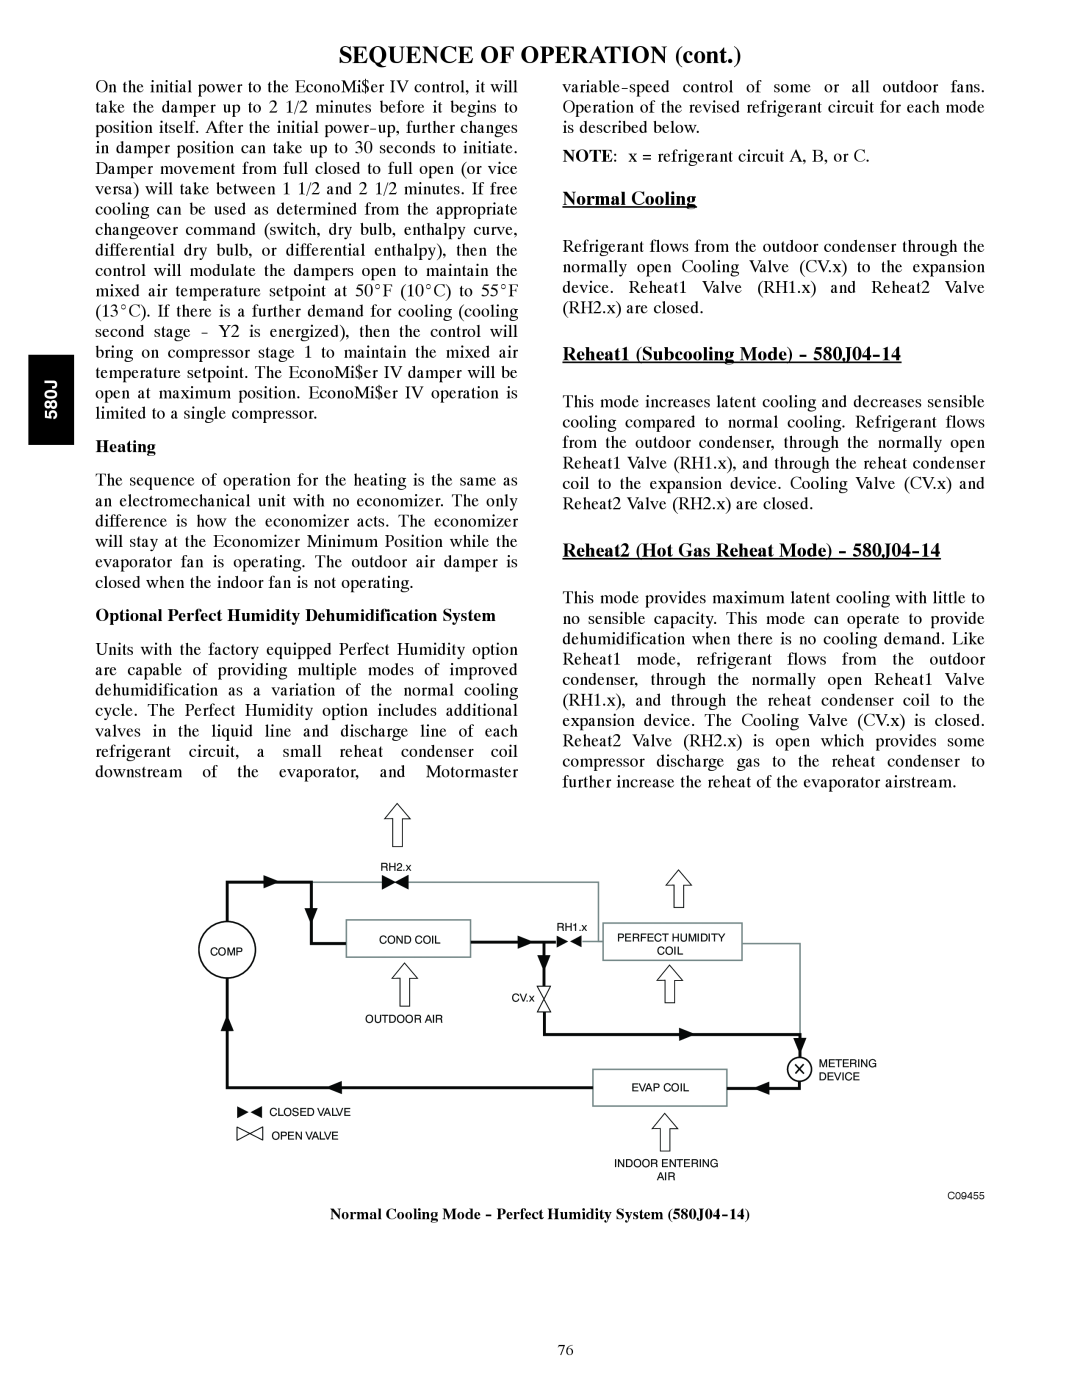 Bryant manual SEQUENCE OF OPERATION cont, Normal Cooling, Reheat1 Subcooling Mode - 580J04-14, Heating 